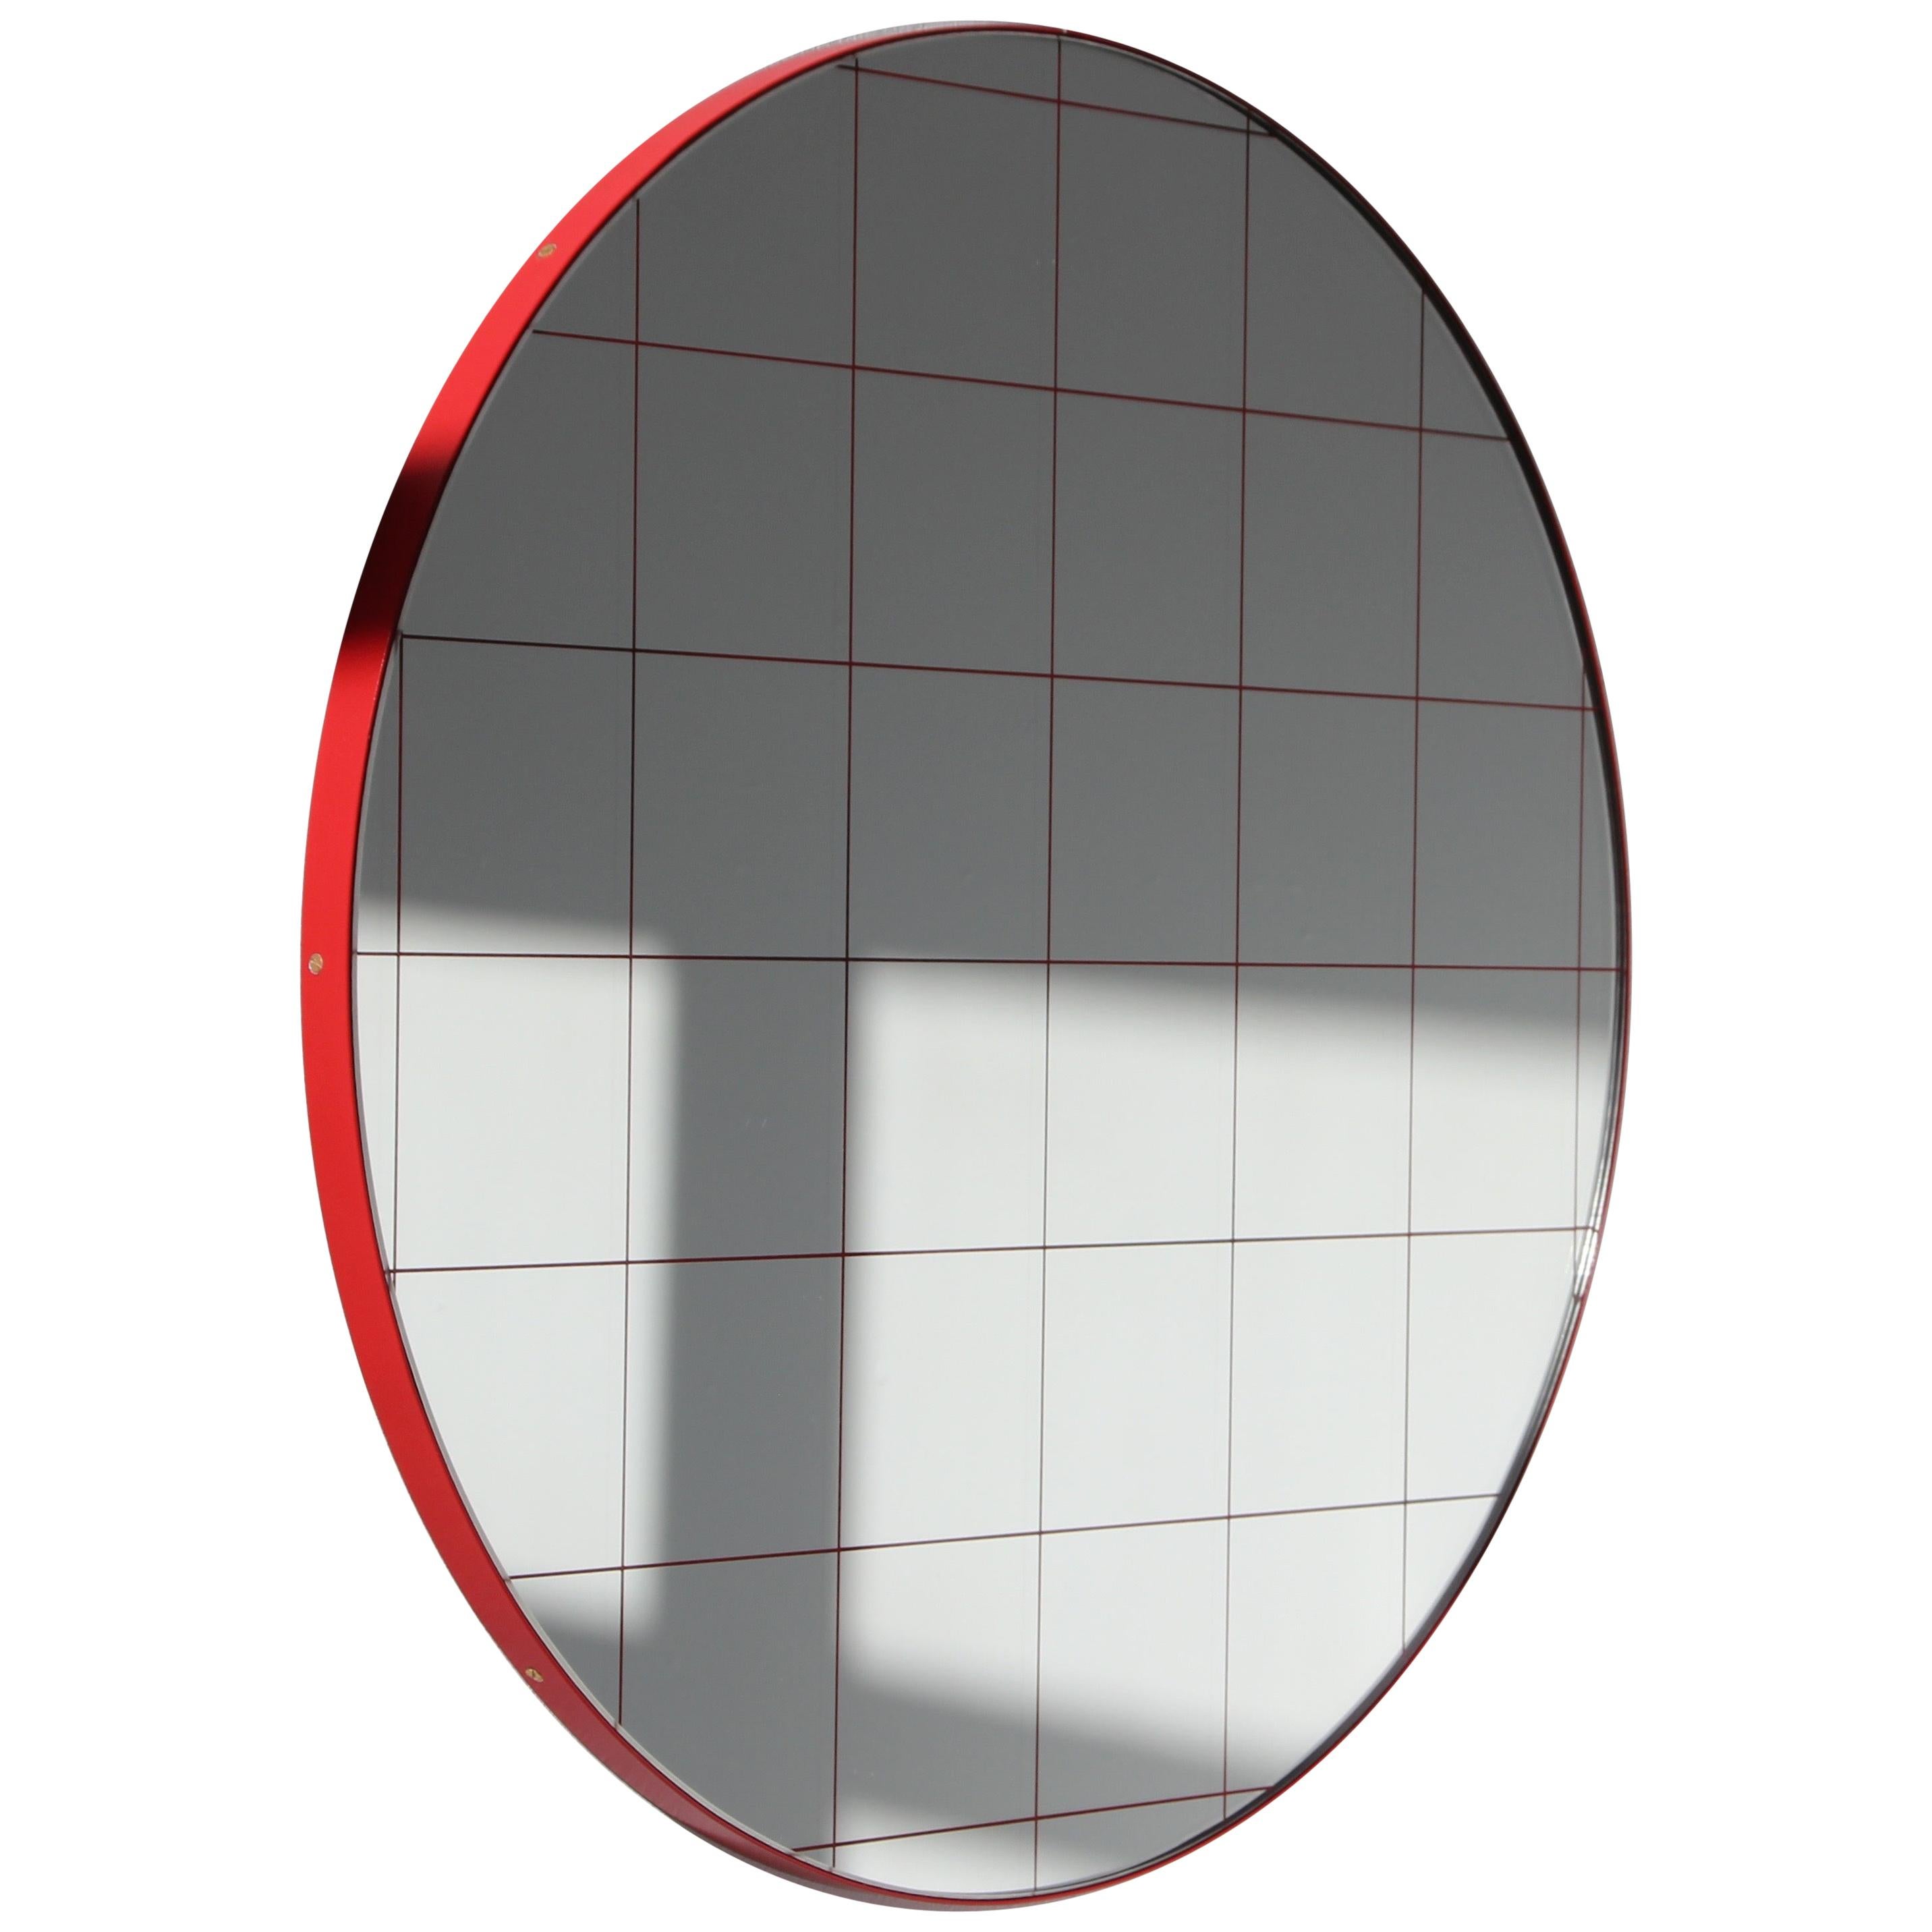 Orbis Red Grid Decorative Sandblasted Mirror with Modern Red Frame, Small